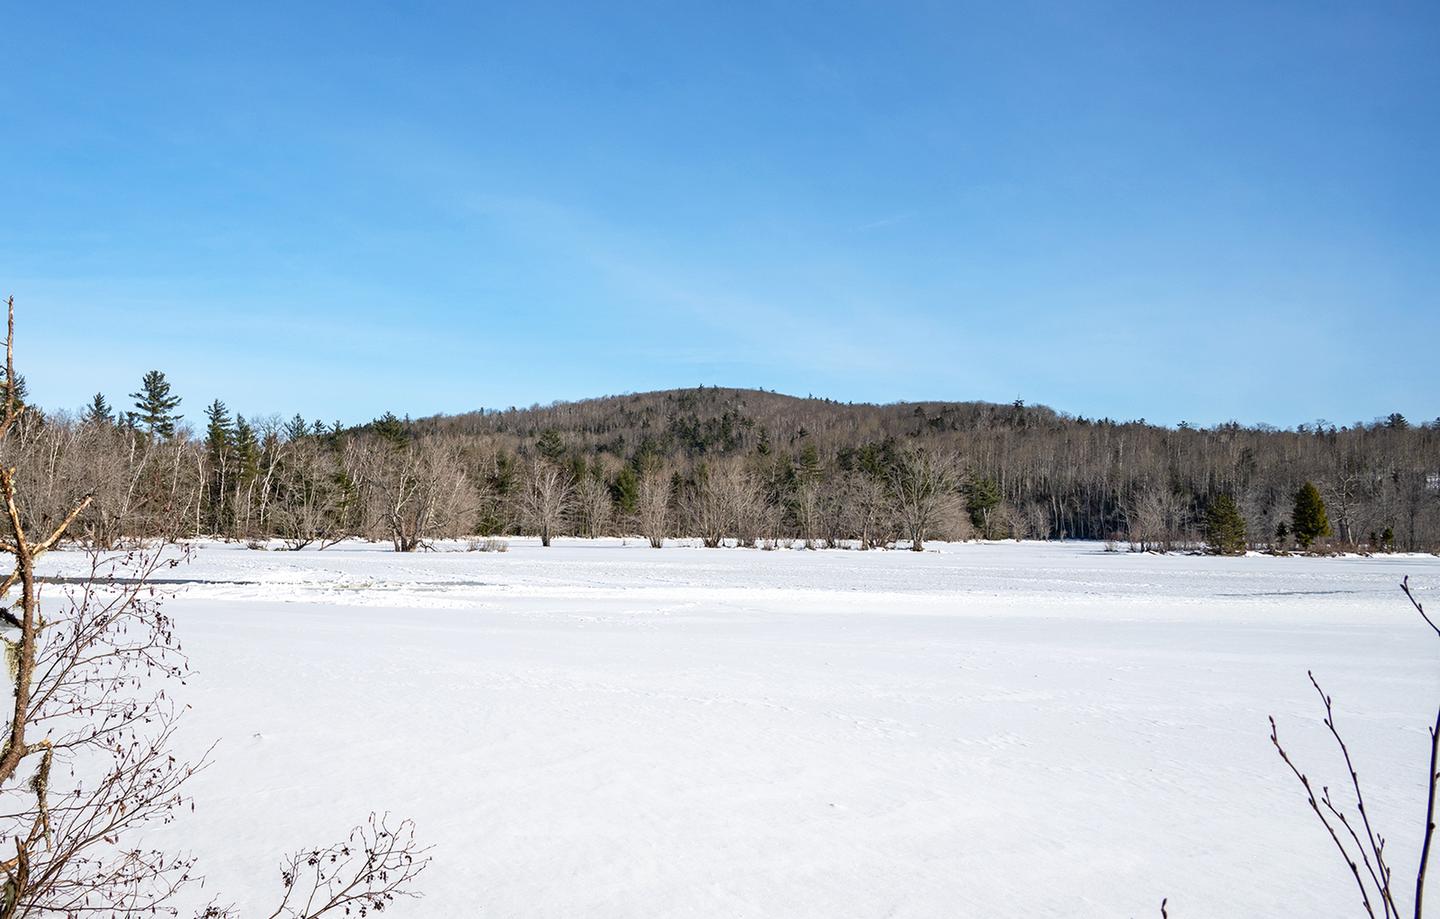 A winter landscape. Clear blue skies with a hill in the distance. Trees are bare. A frozen river with snow on top sits in the foreground.Enjoy views of the East Branch of the Penobscot River from Haskell Hut.